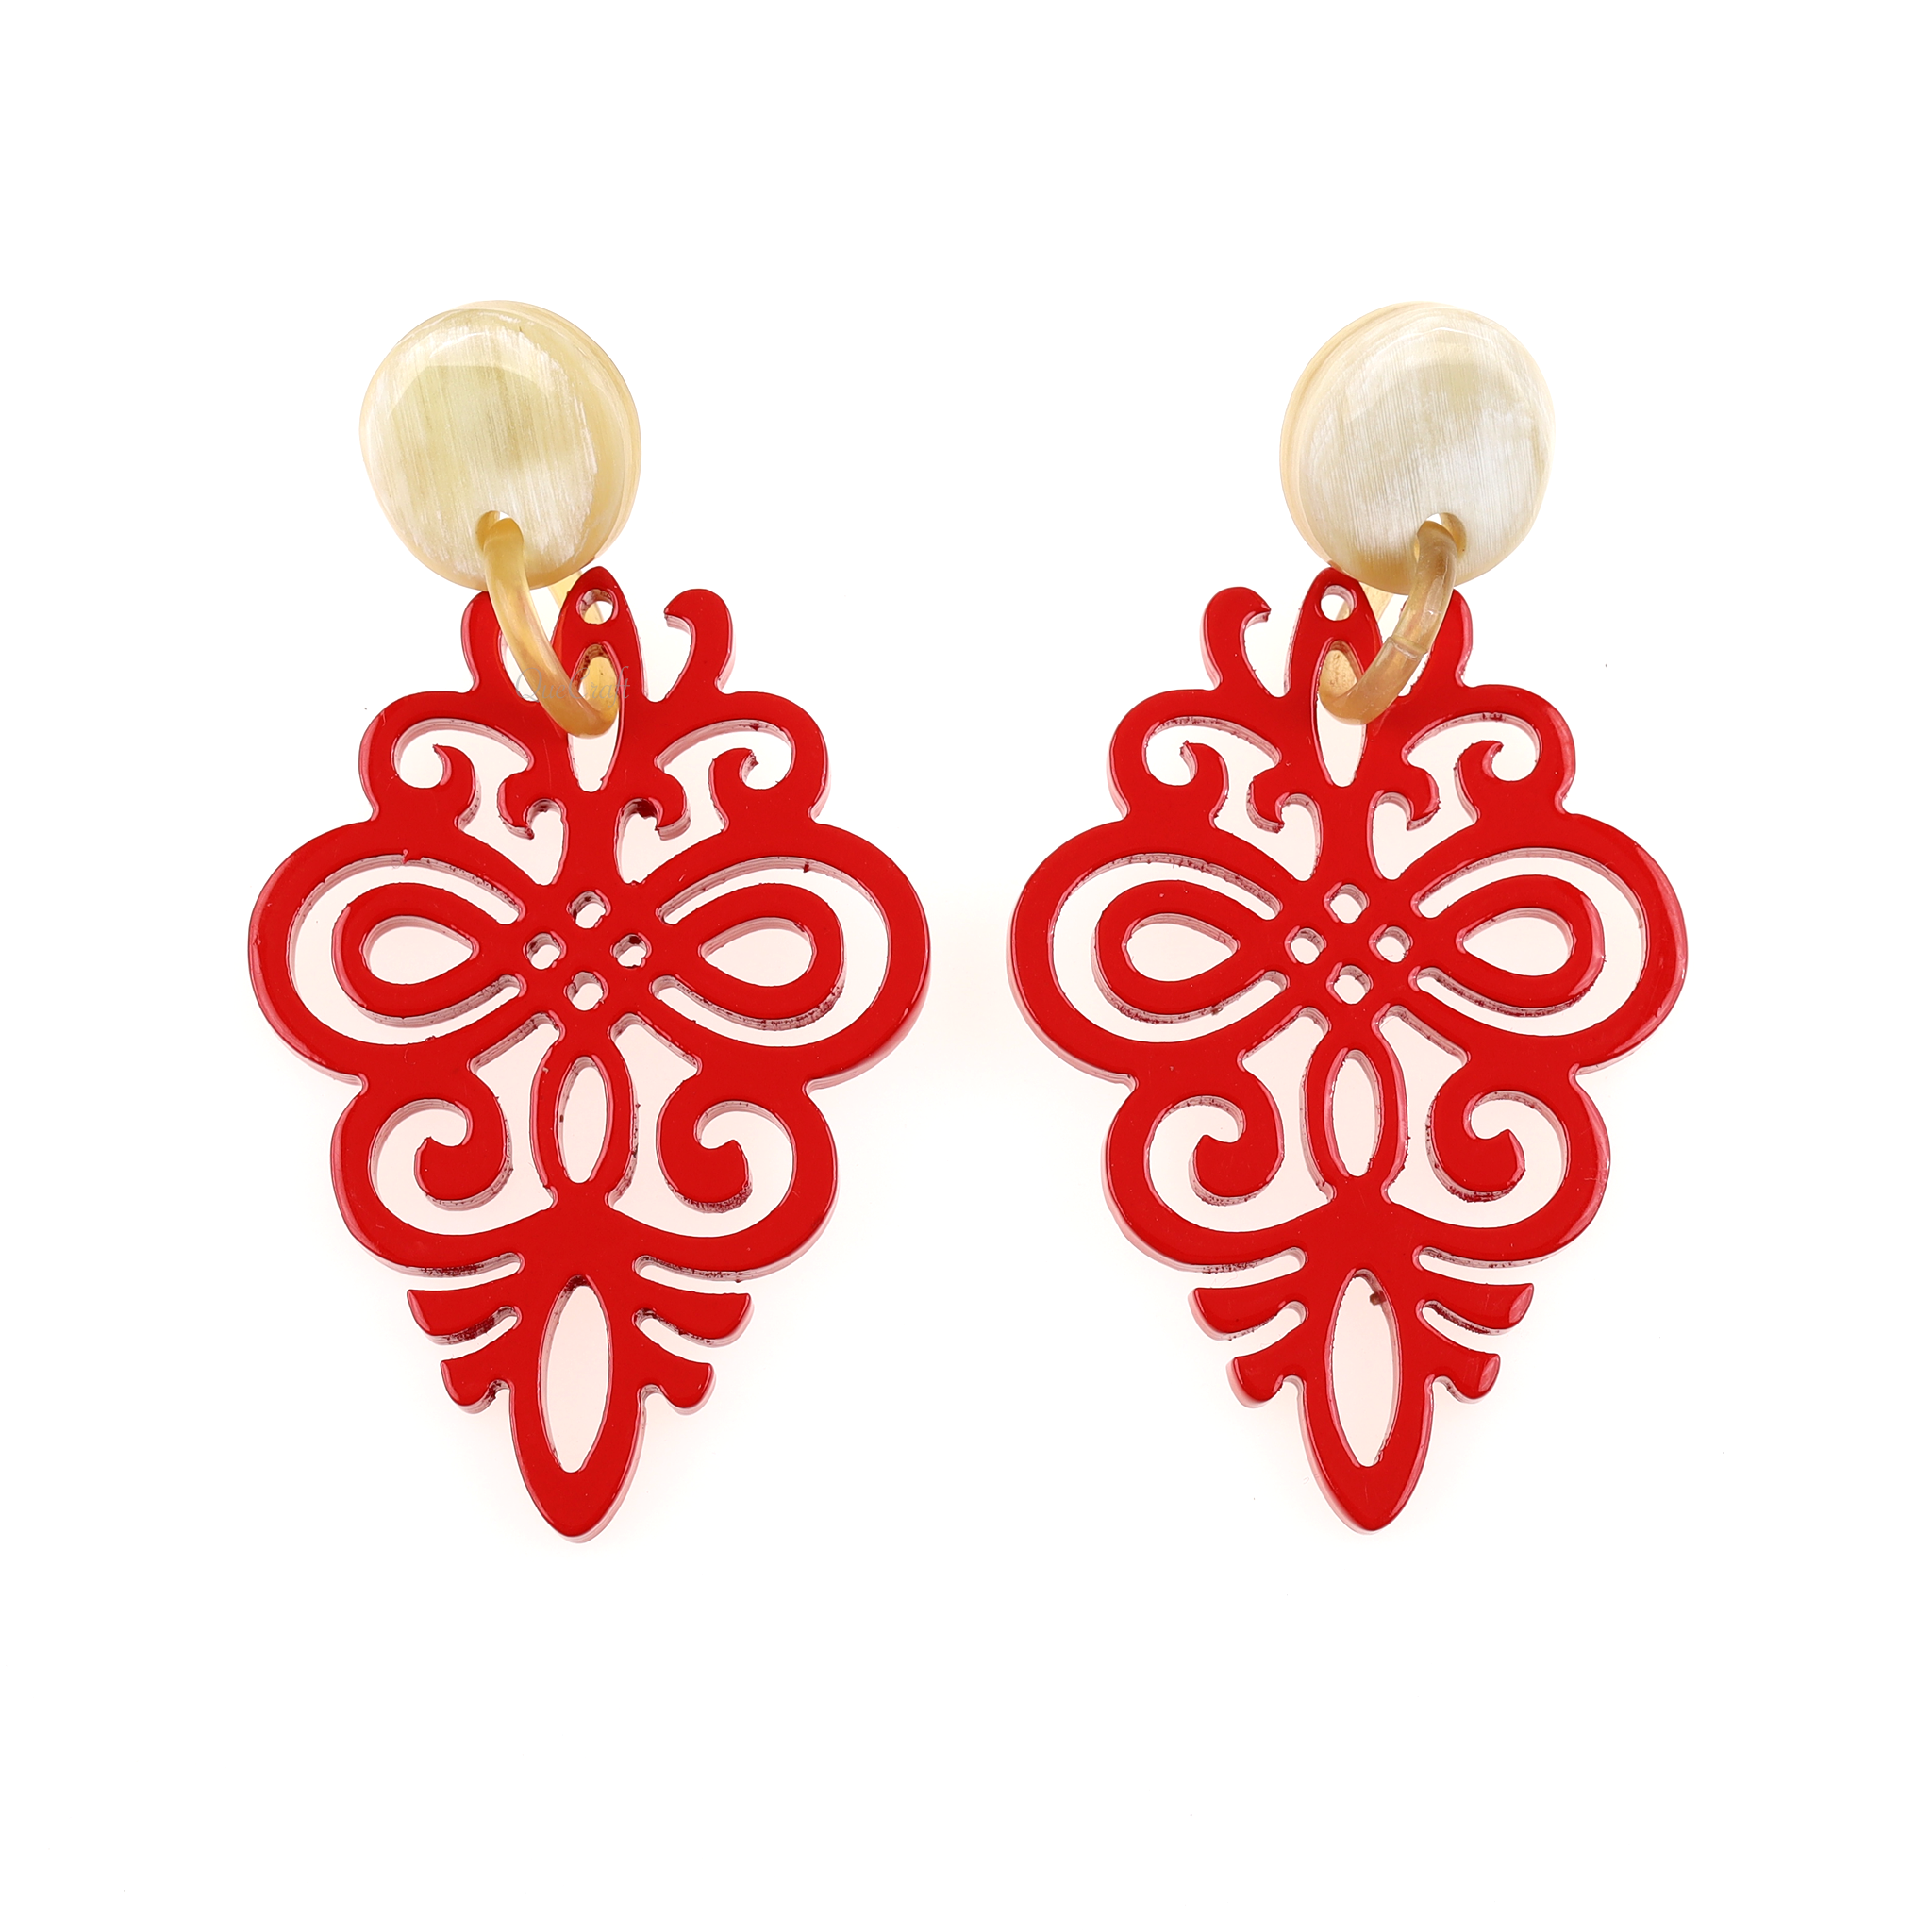 Horn & Lacquer Earrings #14076 - HORN JEWELRY